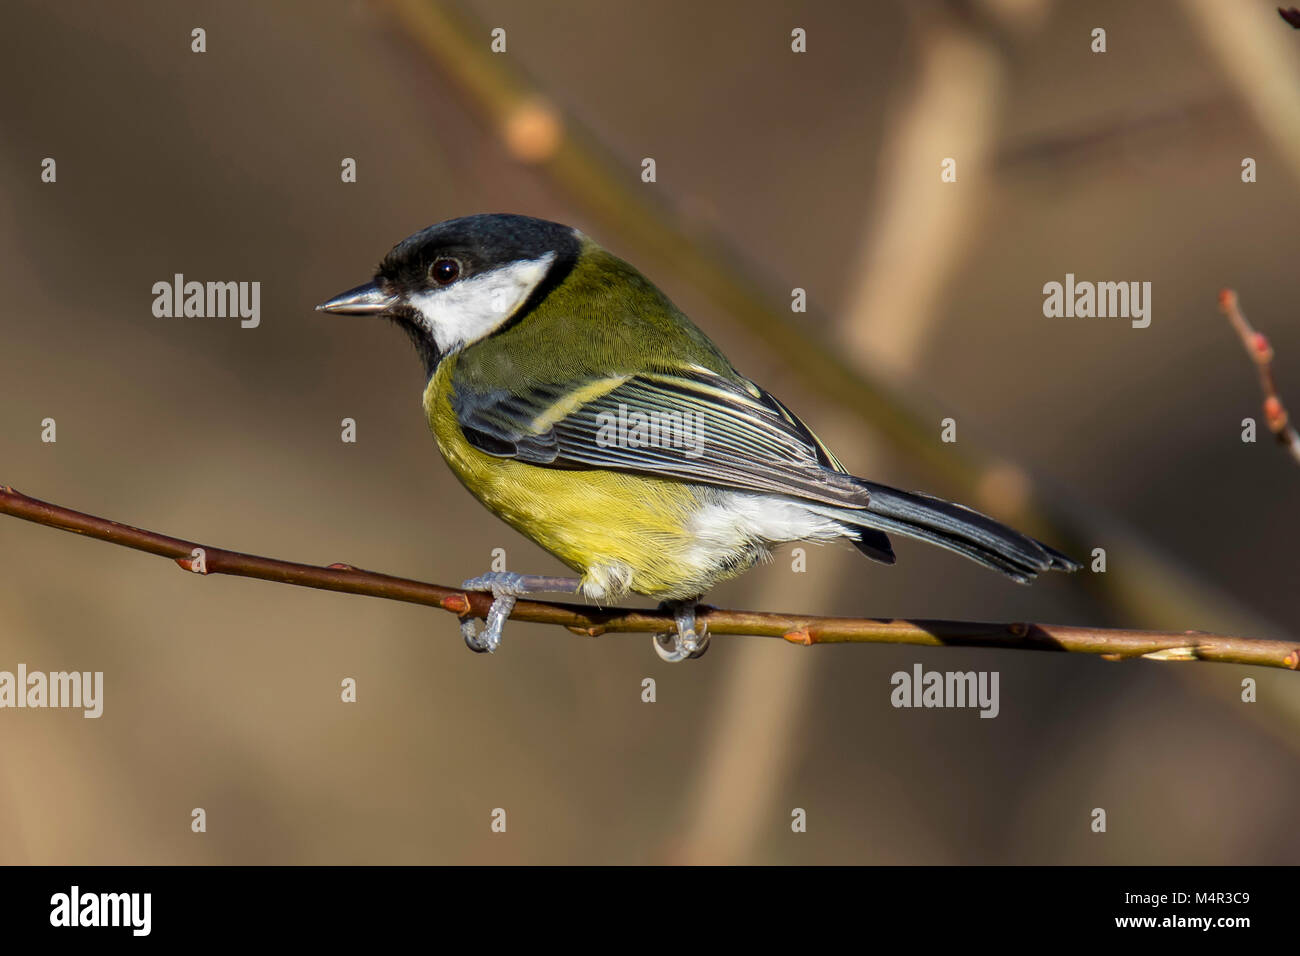 Great tit perched on a branch looking left Stock Photo